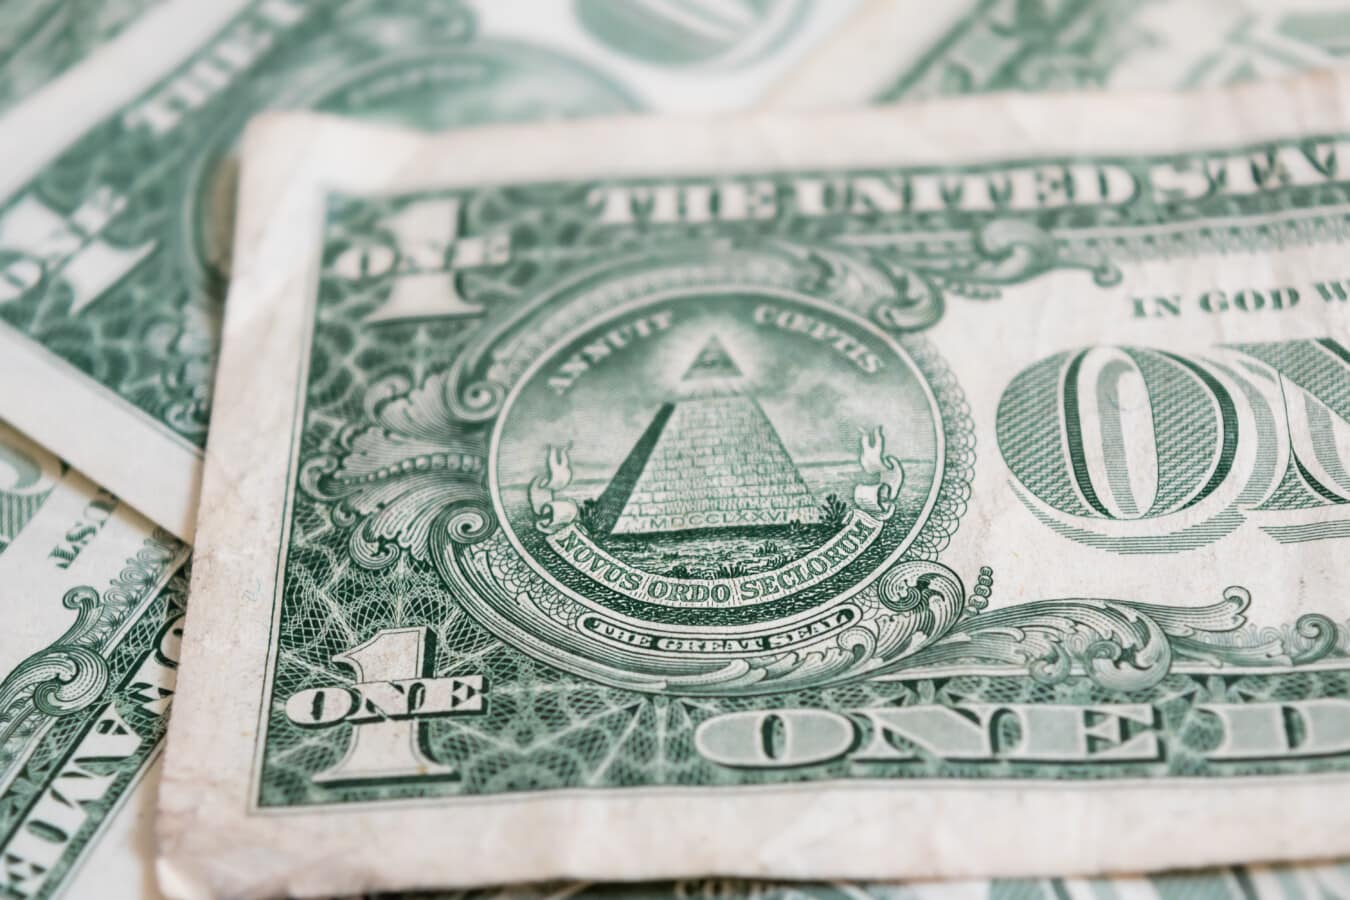 Novus ordo seclorum, one, dollar, pyramid, close-up, cash, money, currency, banknote, paper, economy